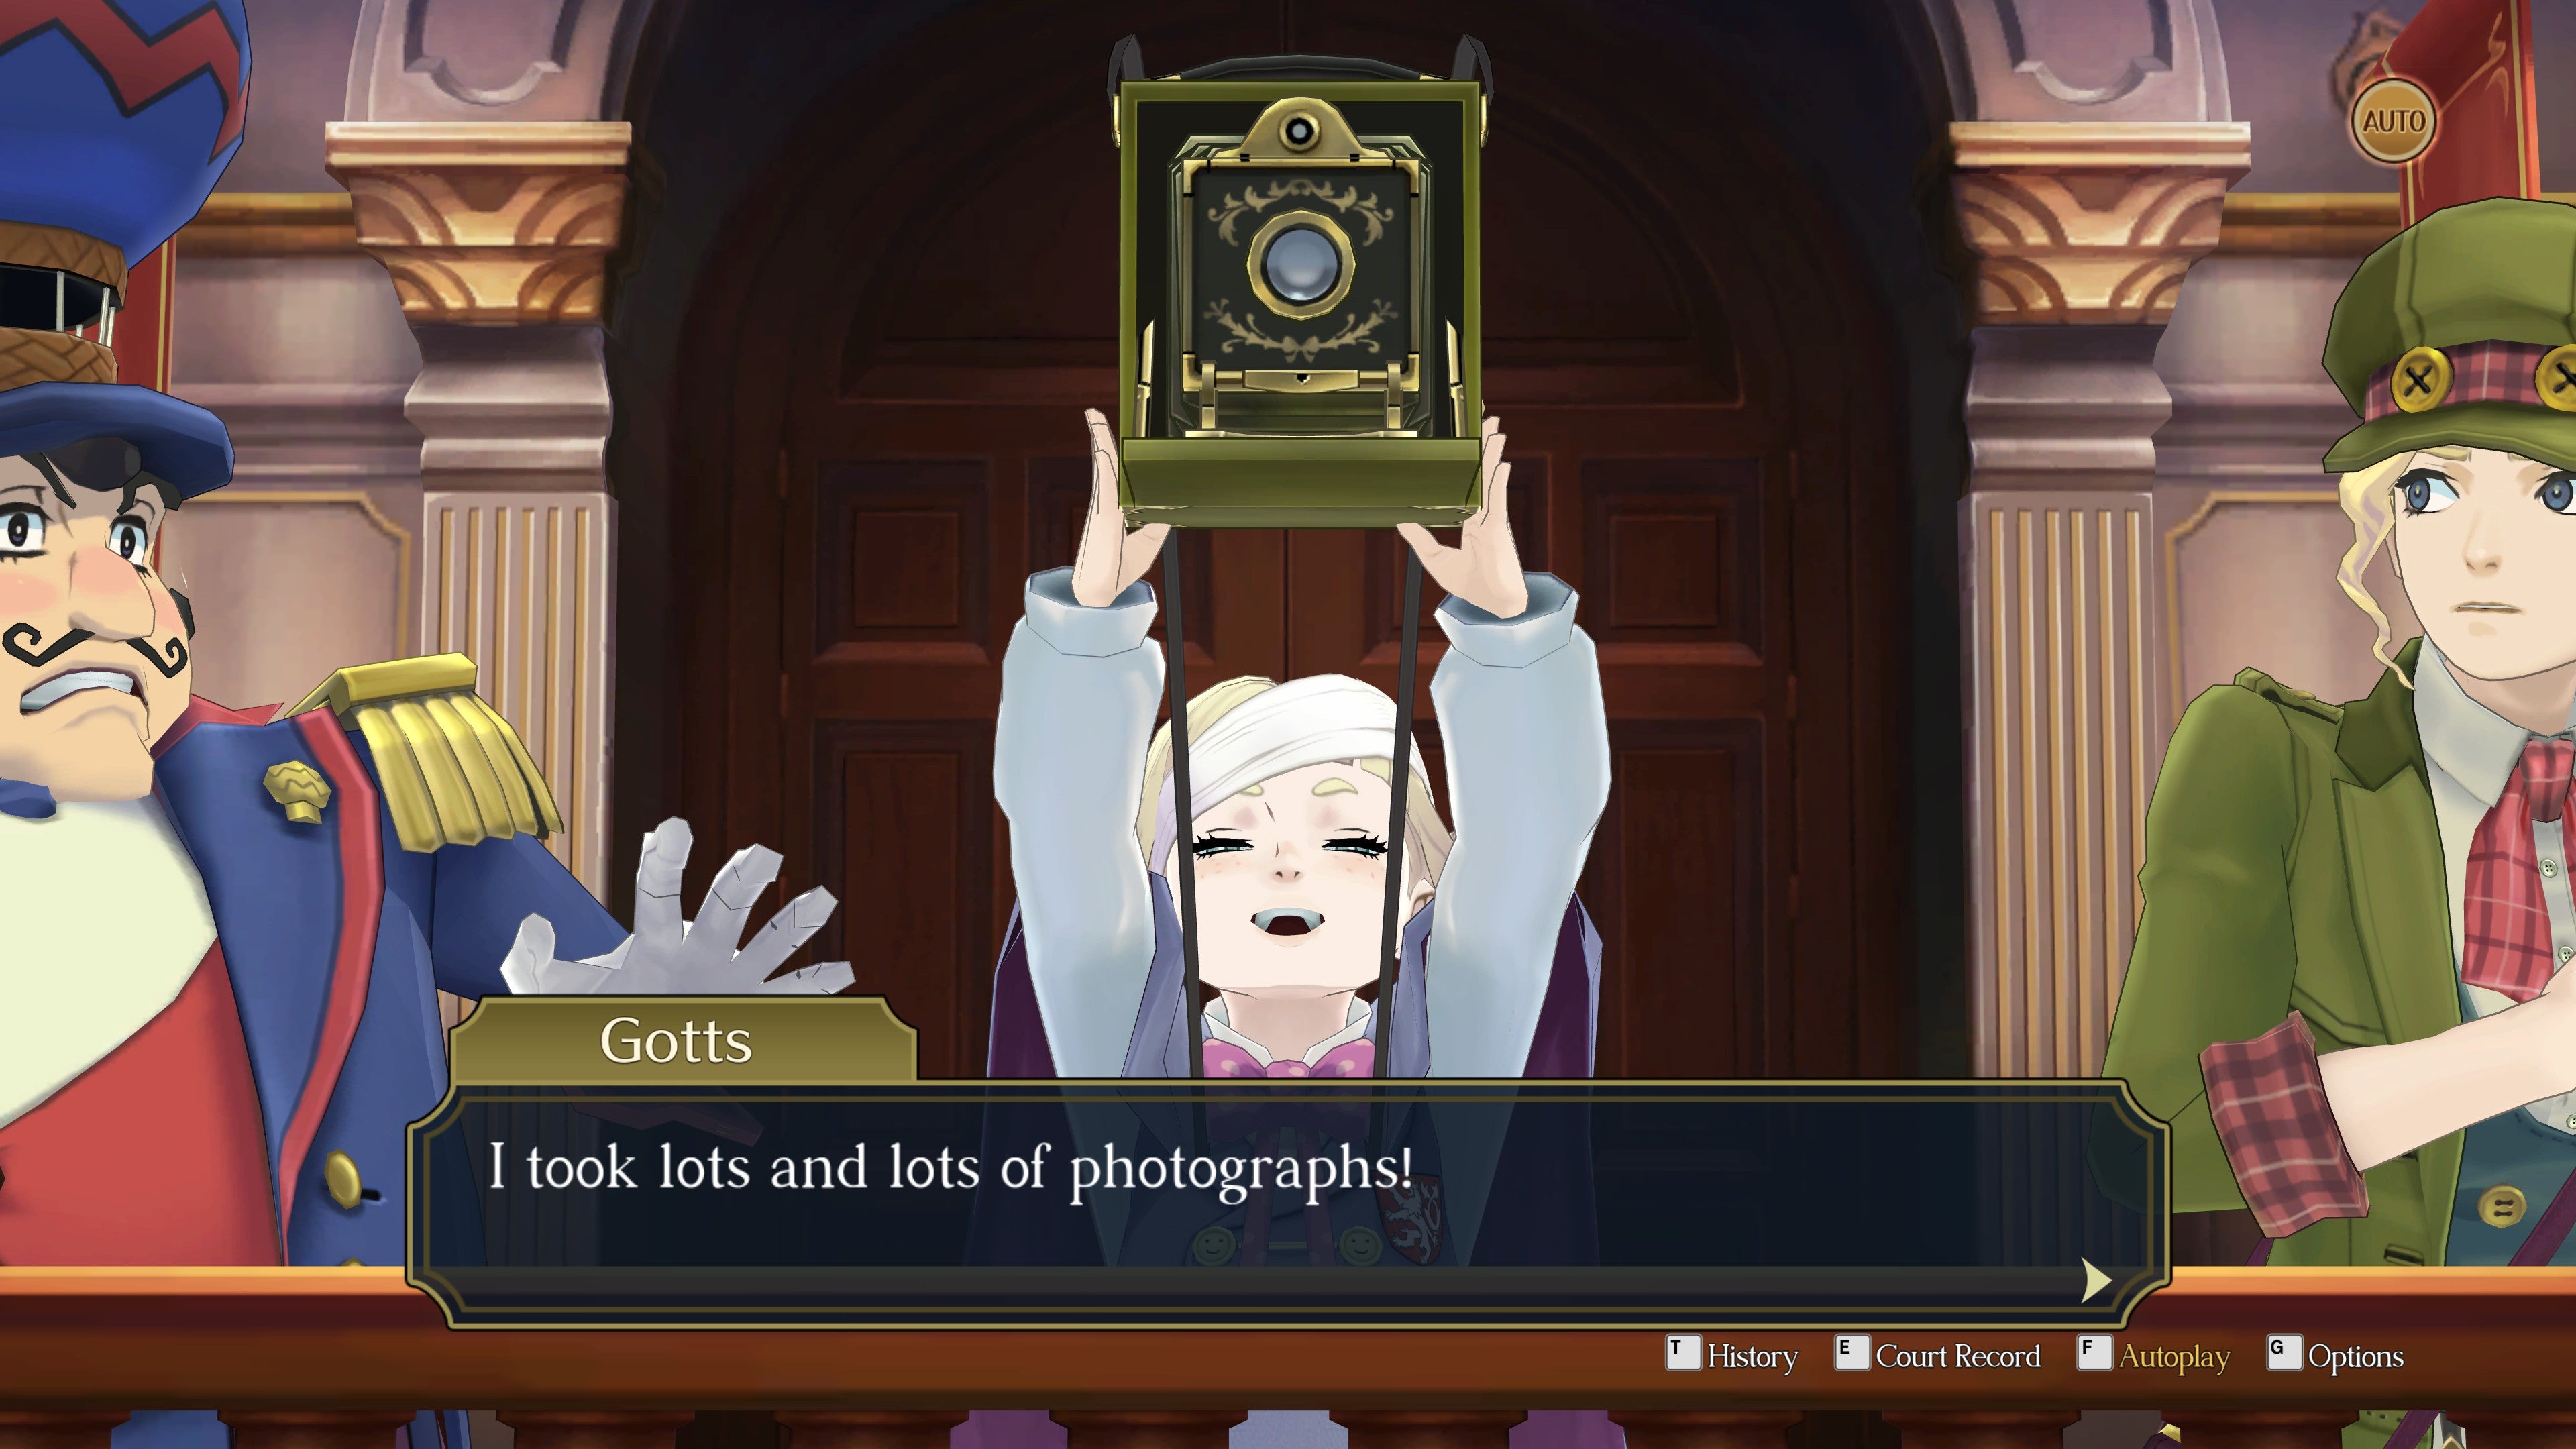 A young boy holds up a camera in the witness stand in The Great Ace Attorney Chronicles